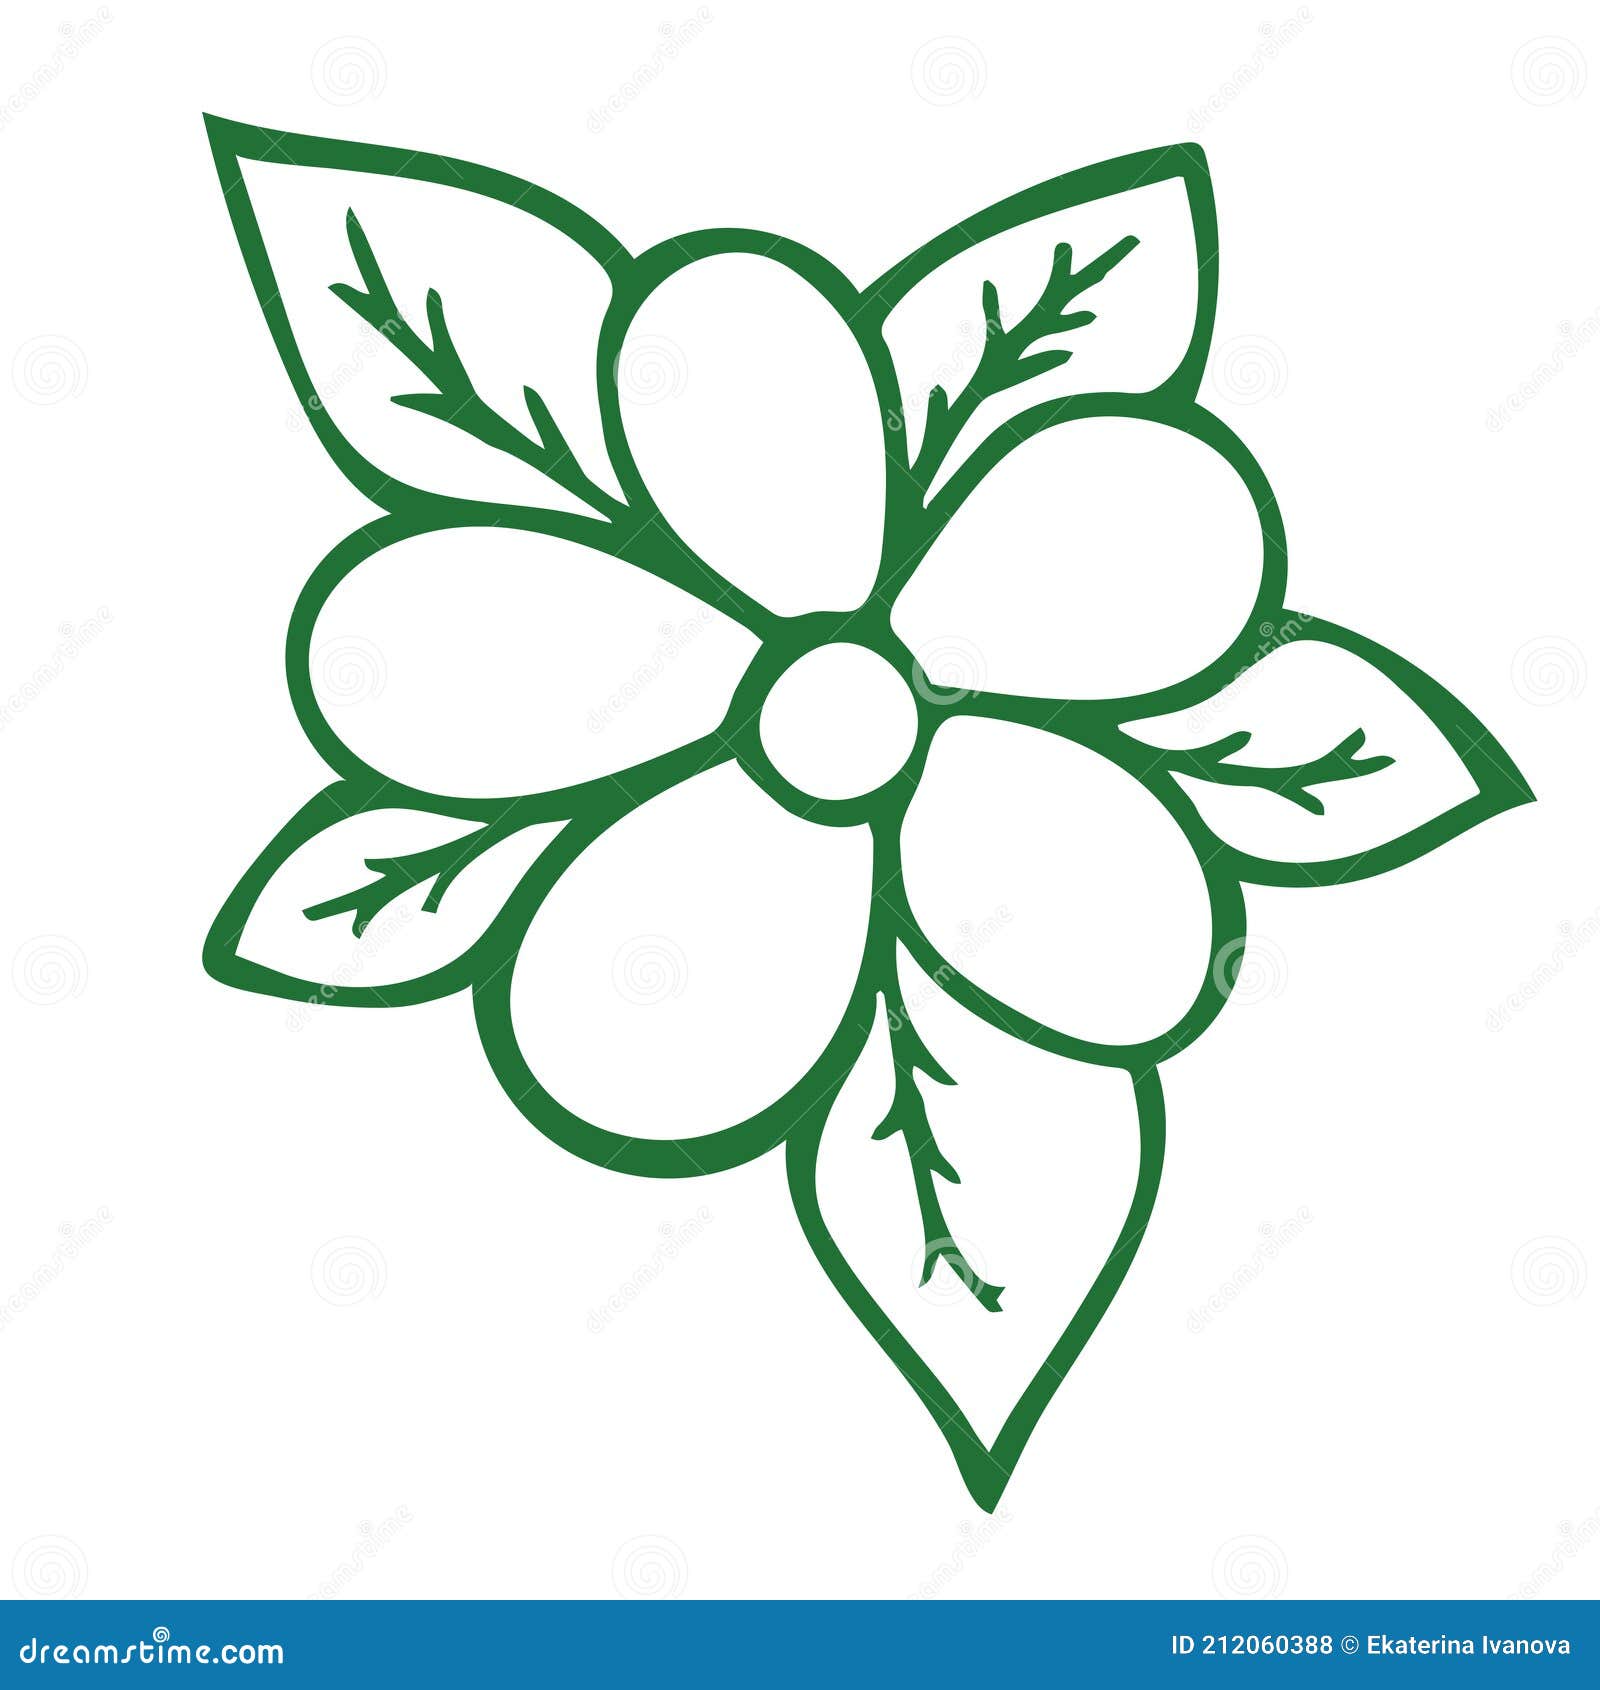 14,891 Pencil Drawing Simple Design Flower Simple Flower Designs Images,  Stock Photos, 3D objects, & Vectors | Shutterstock